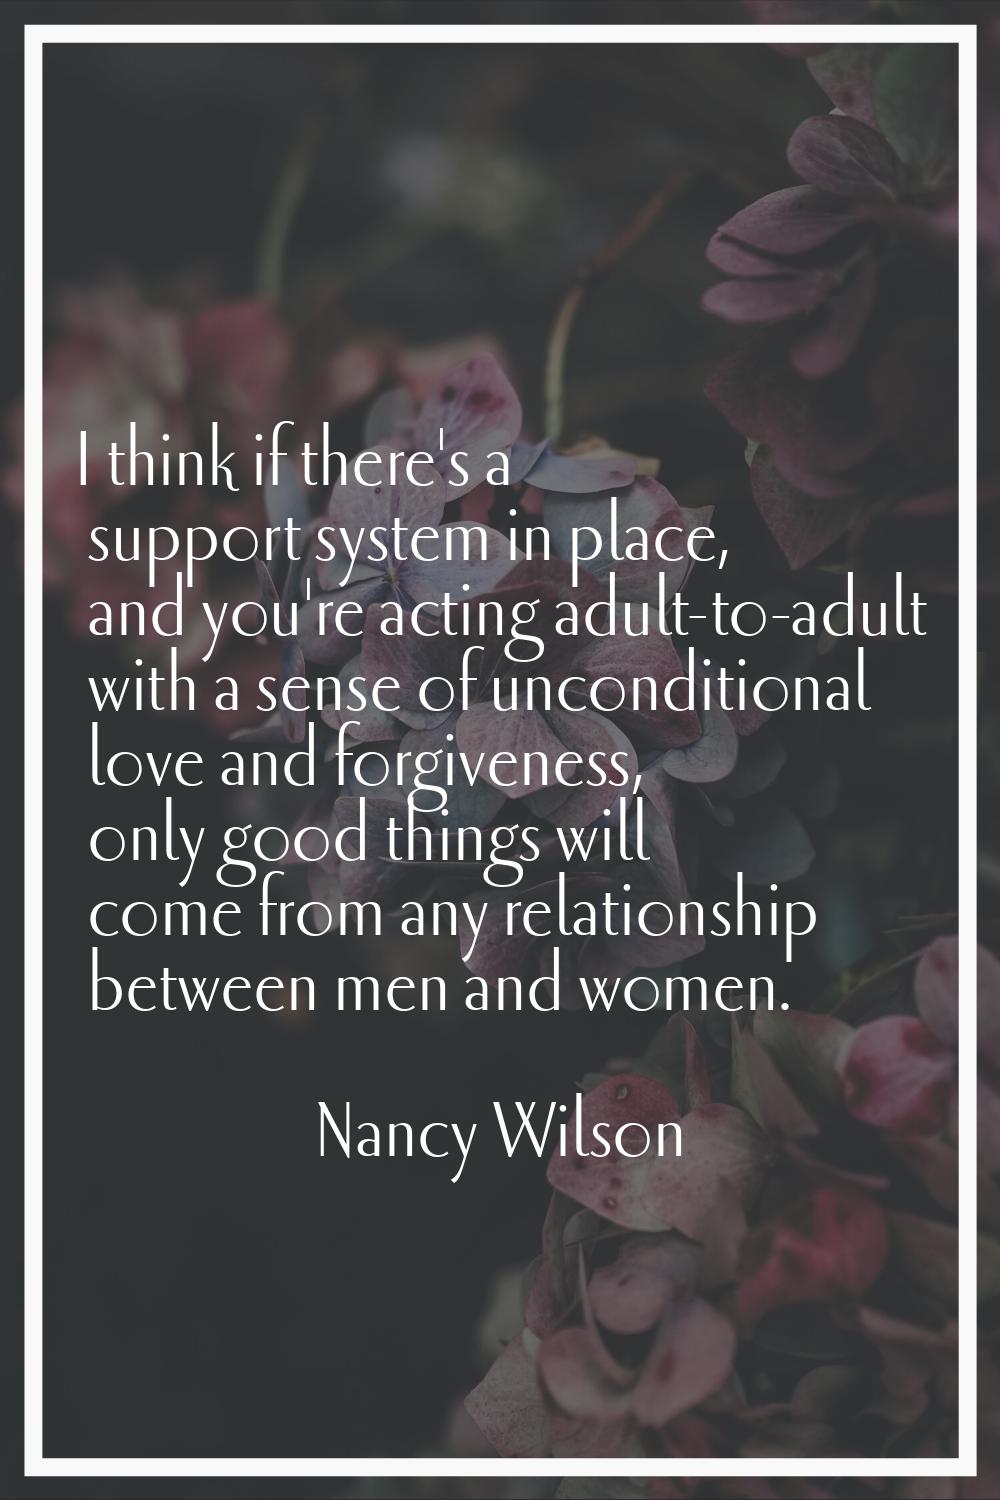 I think if there's a support system in place, and you're acting adult-to-adult with a sense of unco